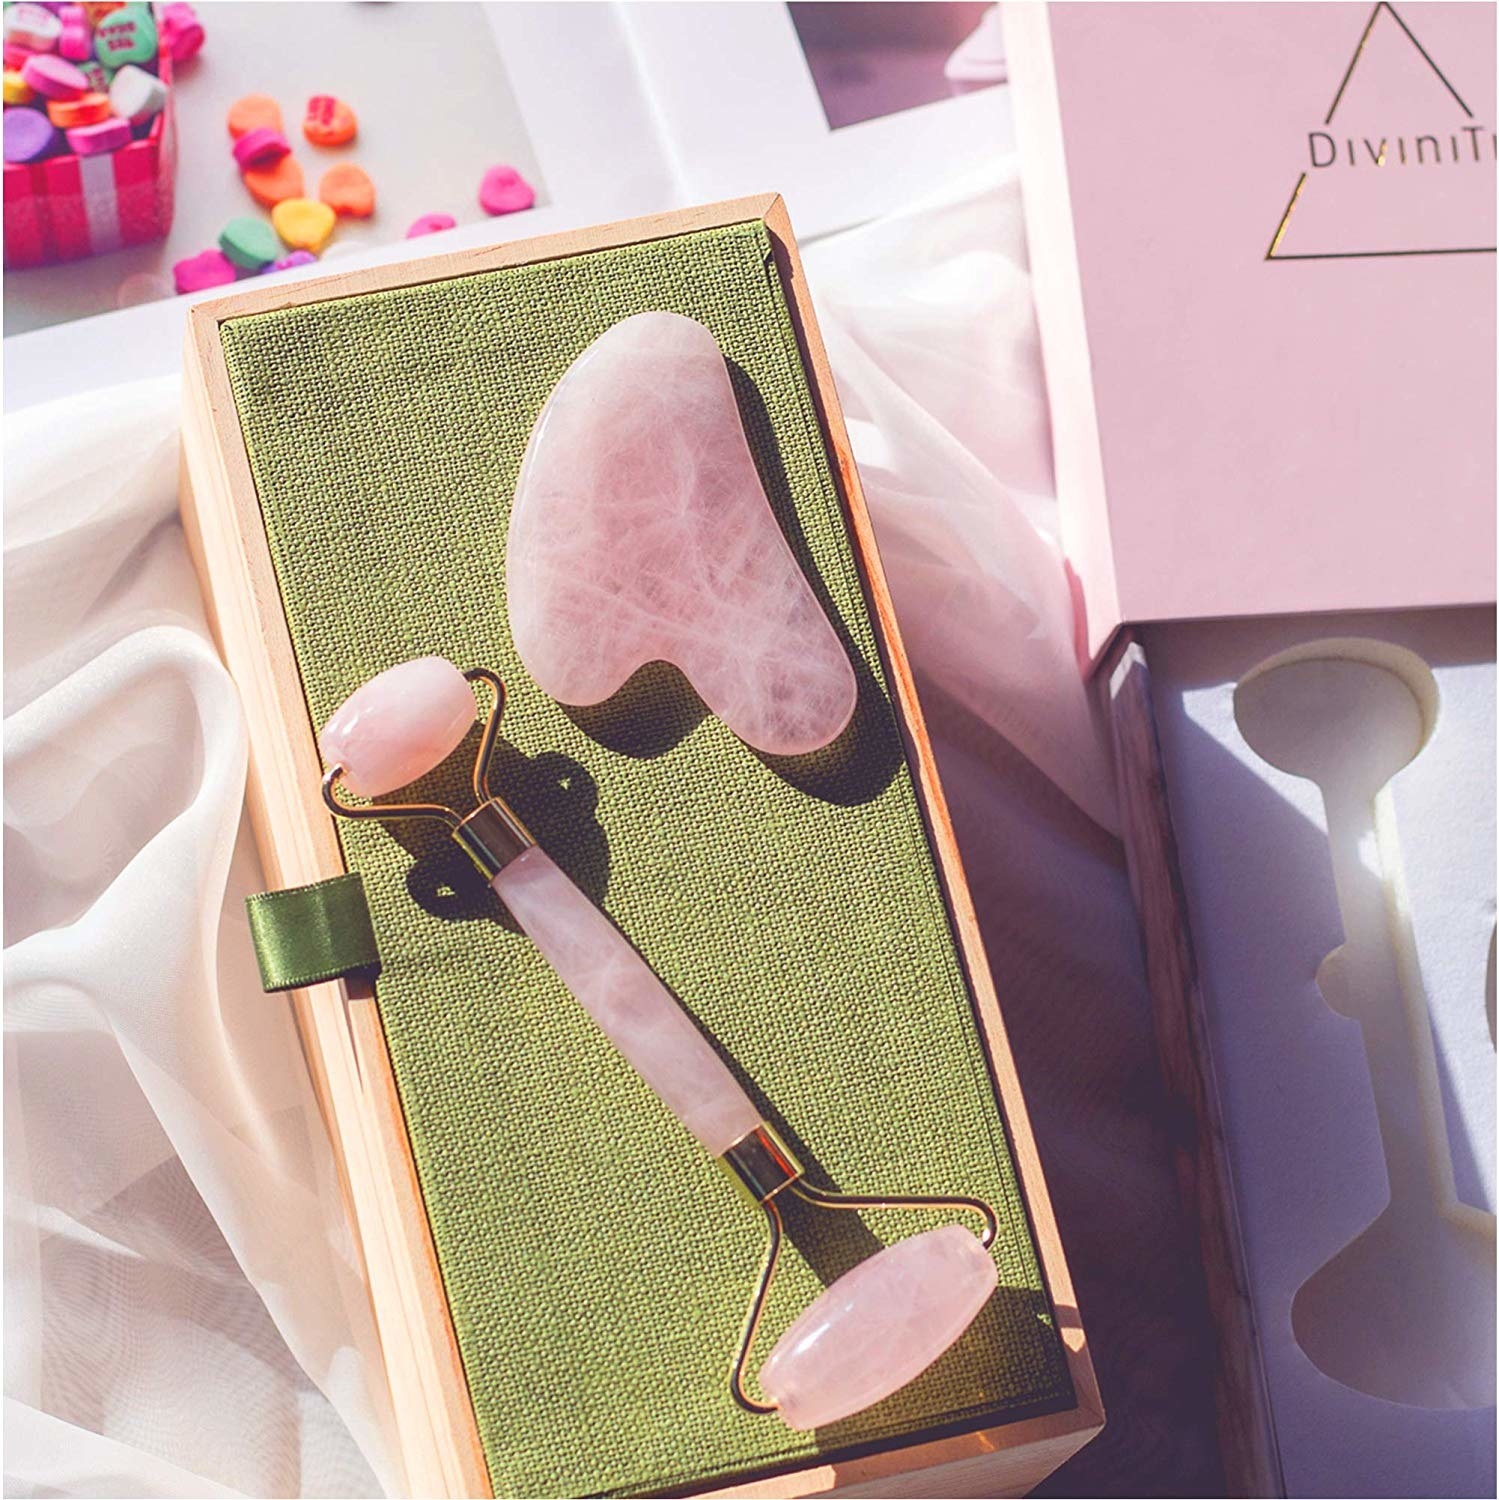 product image of the face roller and guasha tool in pink on the box